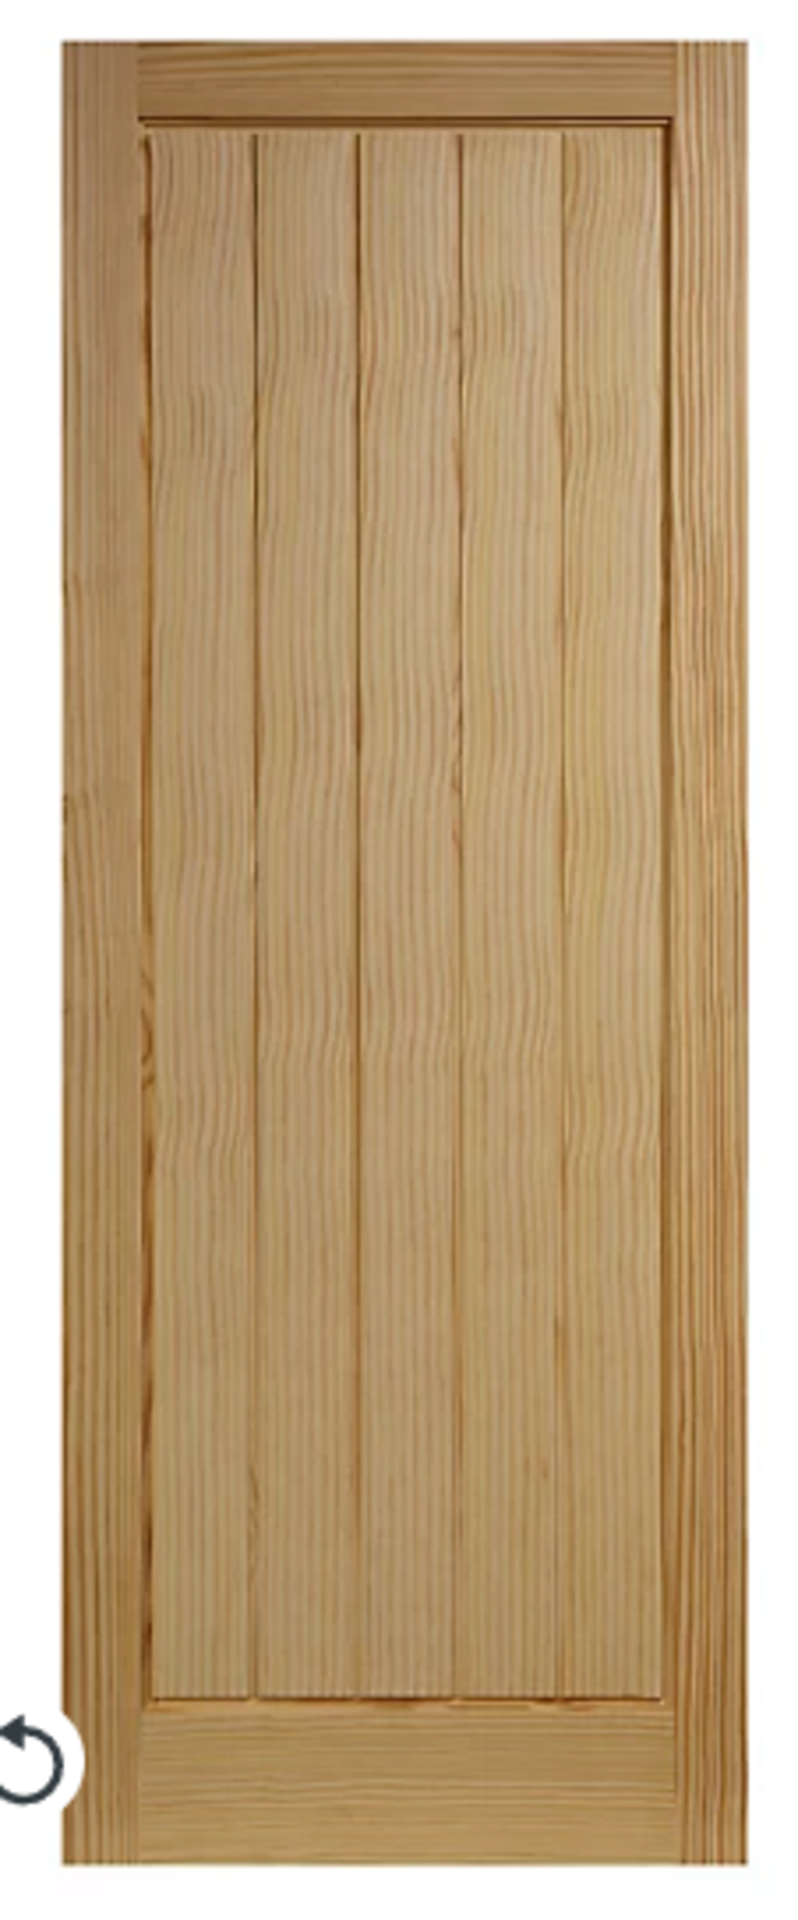 4 X MIXED PANEL DOORS/GLAZED DOORS INCLUDING CLEAR PINE, OAK VENEER, KNOTTY PINES AND MORE (CONTAINS - Image 4 of 5